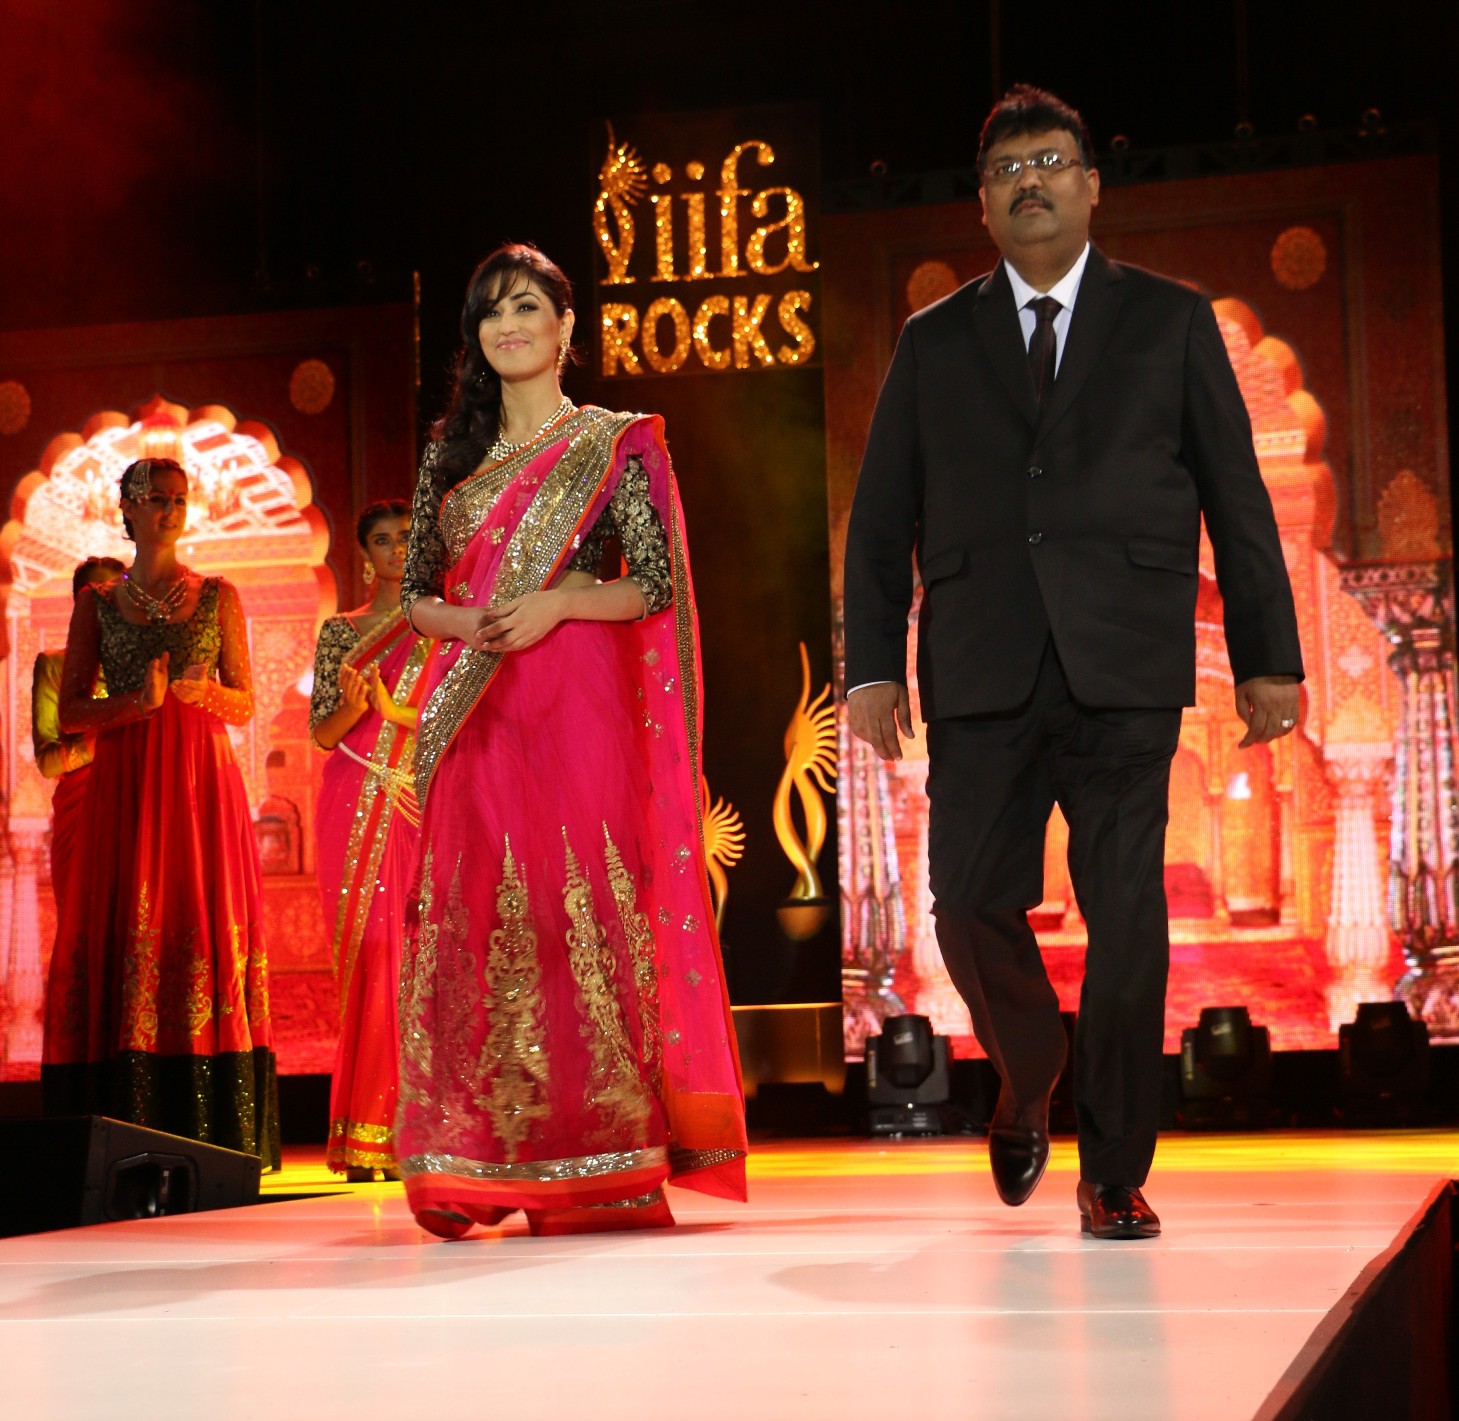 The Dazzling Yami Gautam Walked The Ramp For The IIFA Collection By Vikram Phadnis For Vishal Fashions at IIFA Rocks 2014